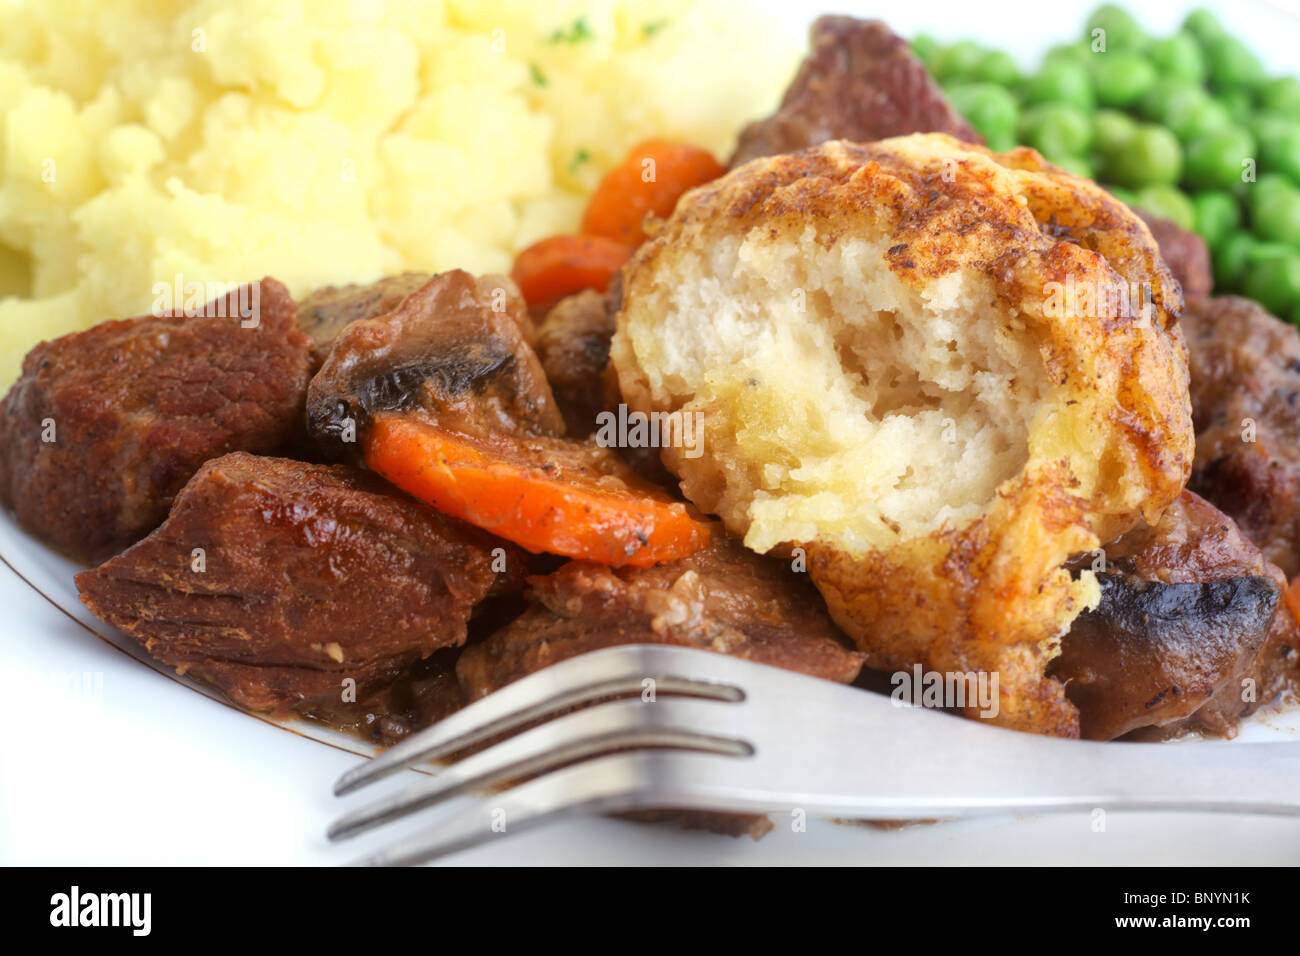 Close-up view of a dinner of beef, mushroom and carrot stew with dumplings Stock Photo